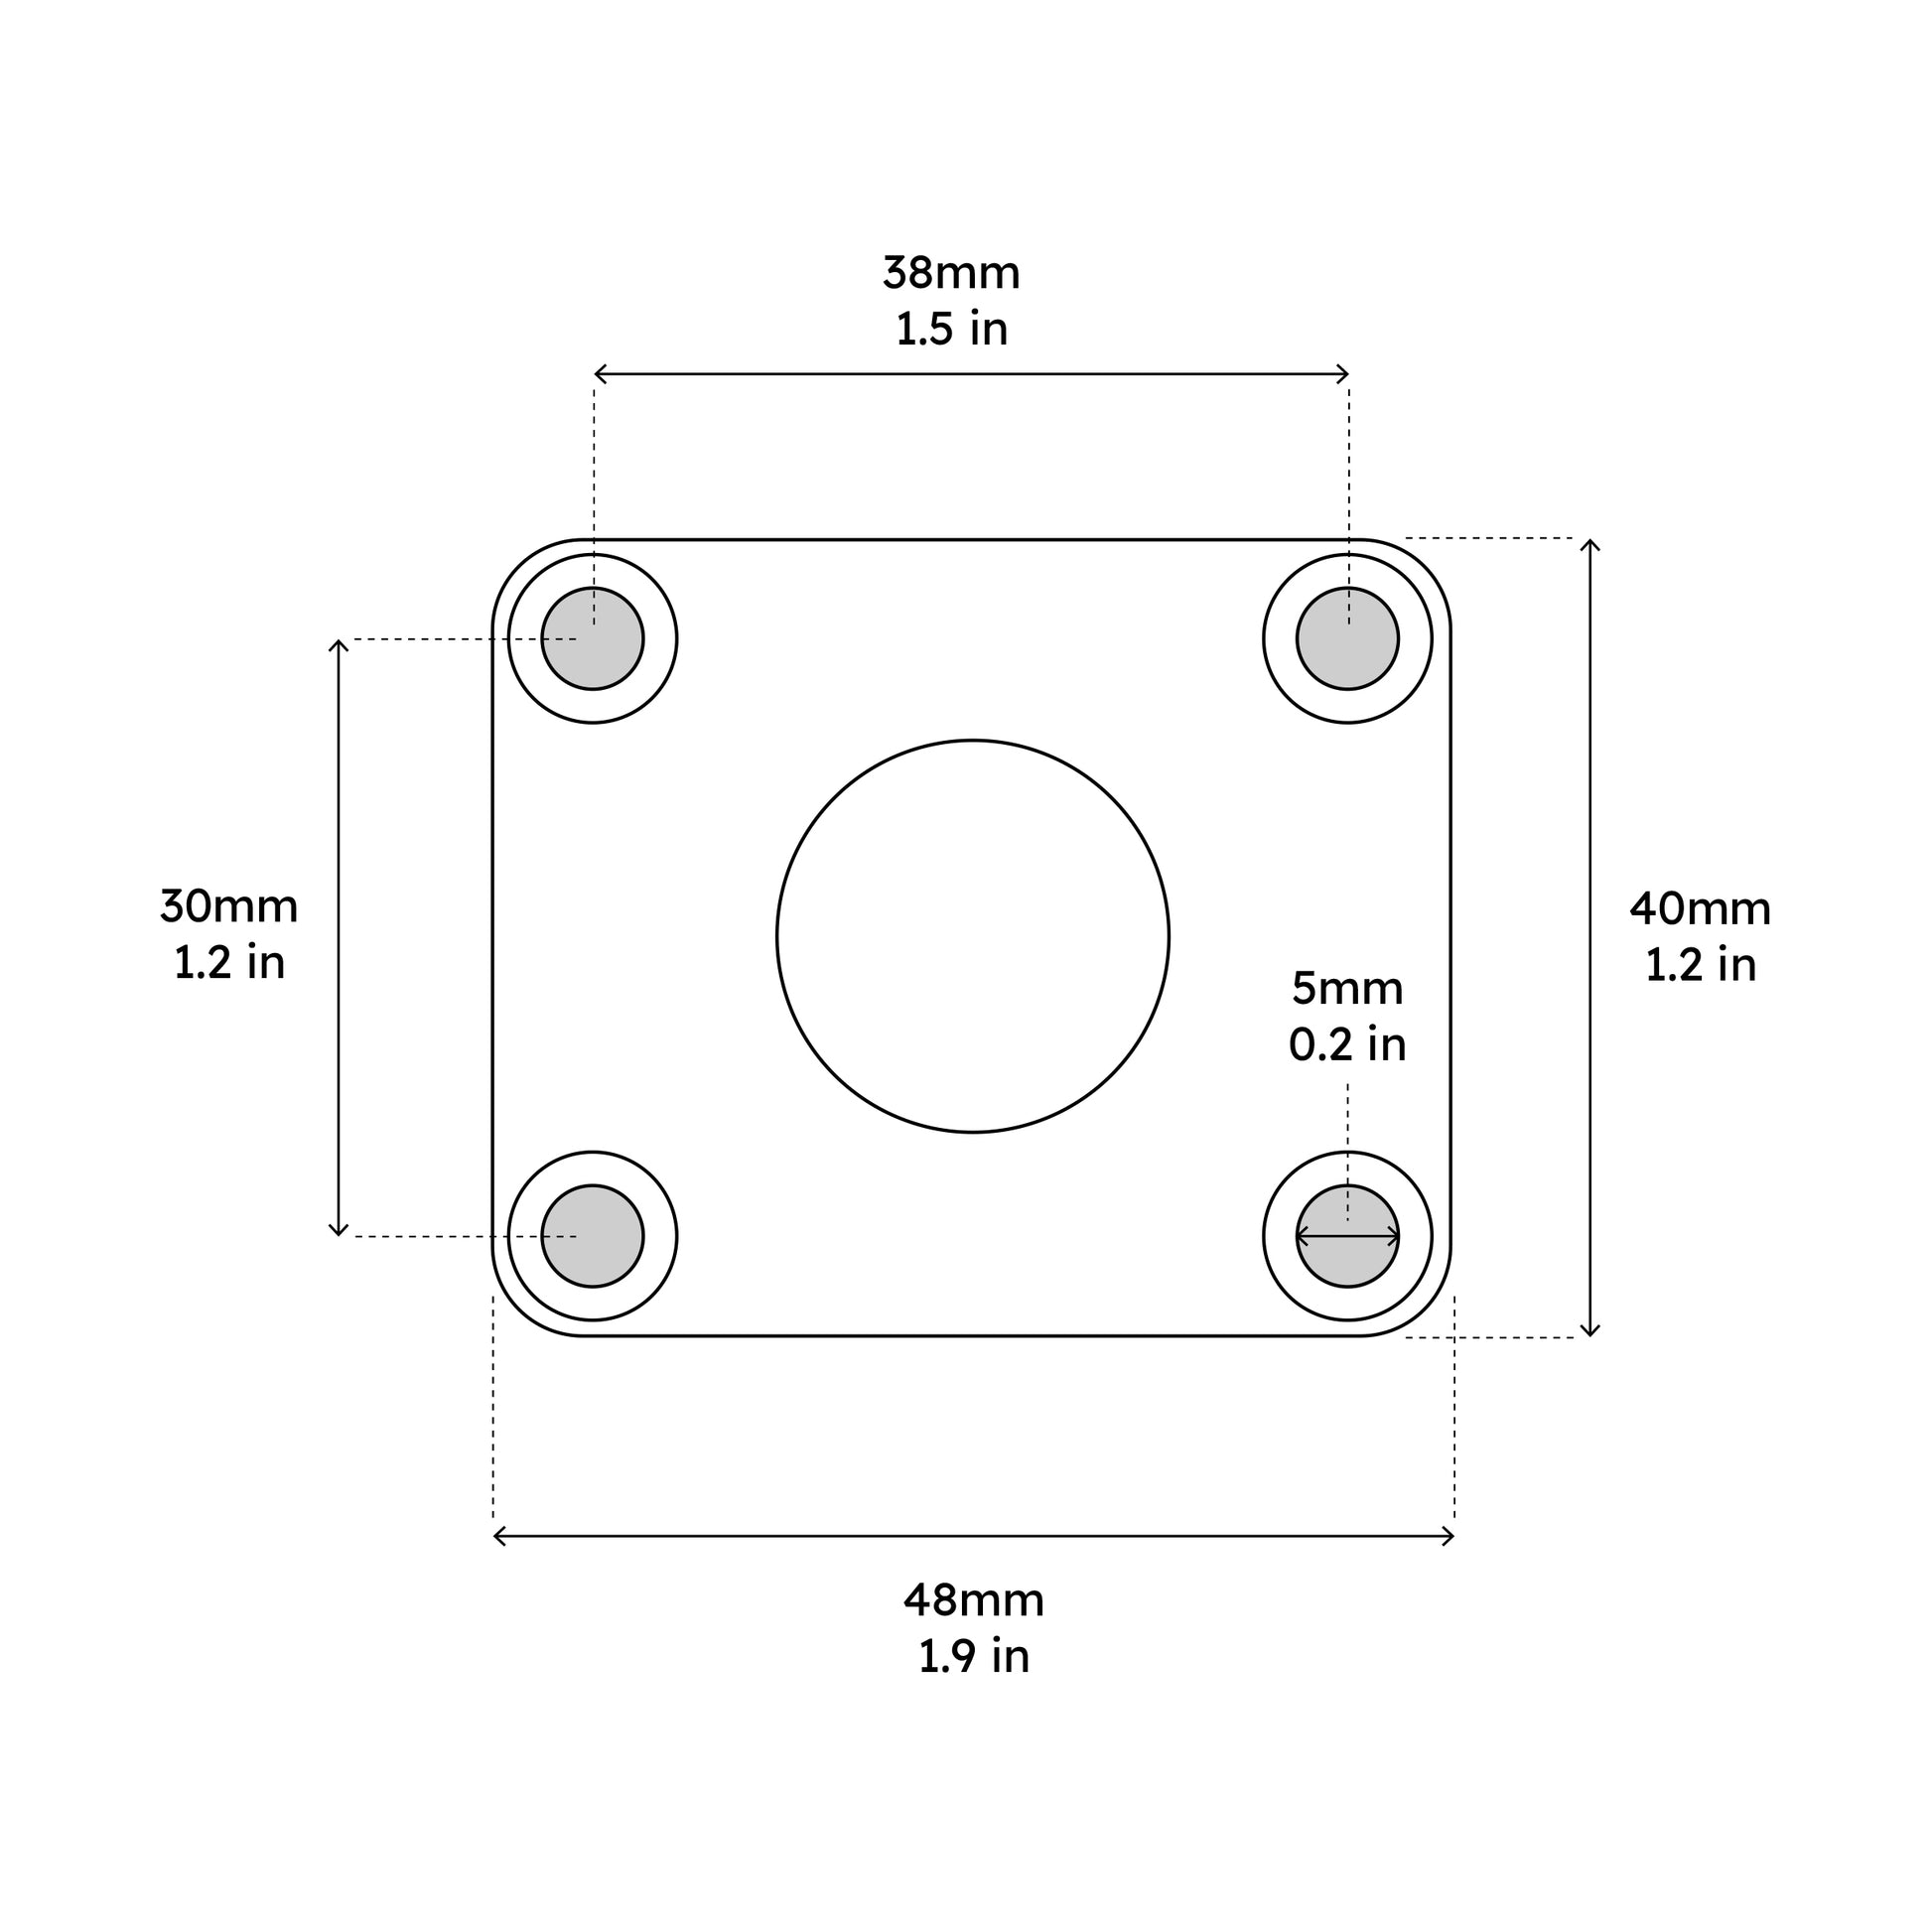 AMPS Mounting Base with 20mm Ball - Offroam